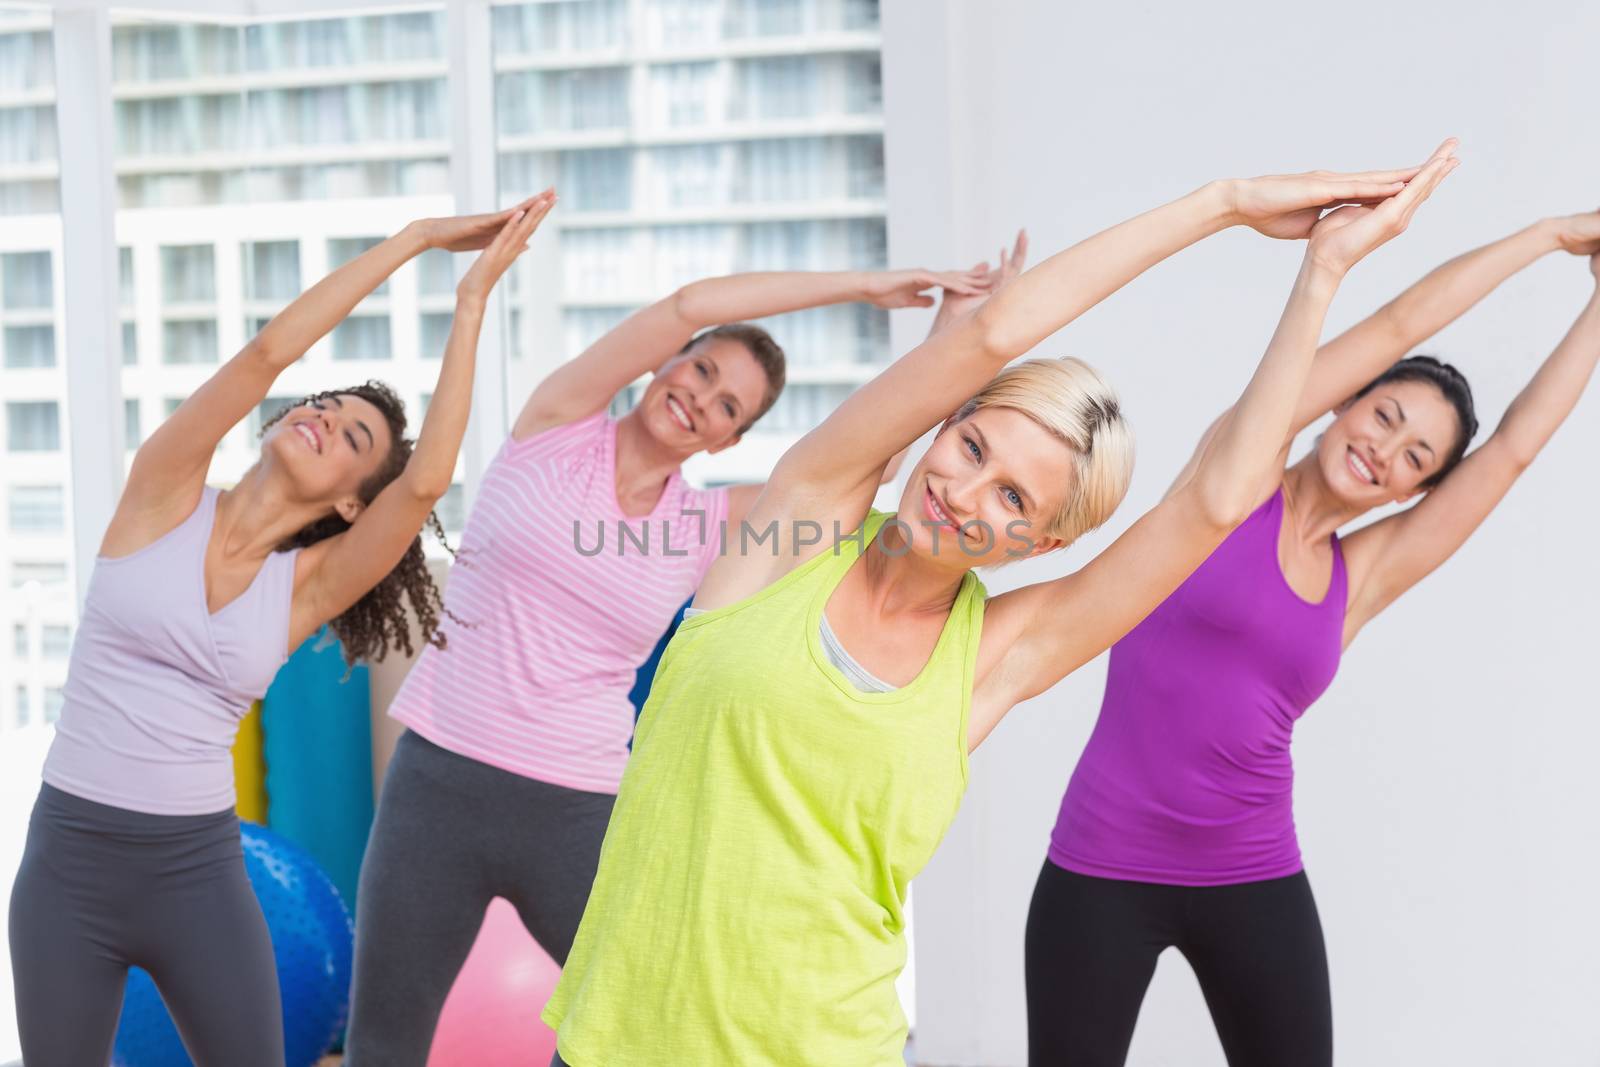 Women practicing stretching exercise at fitness studio by Wavebreakmedia